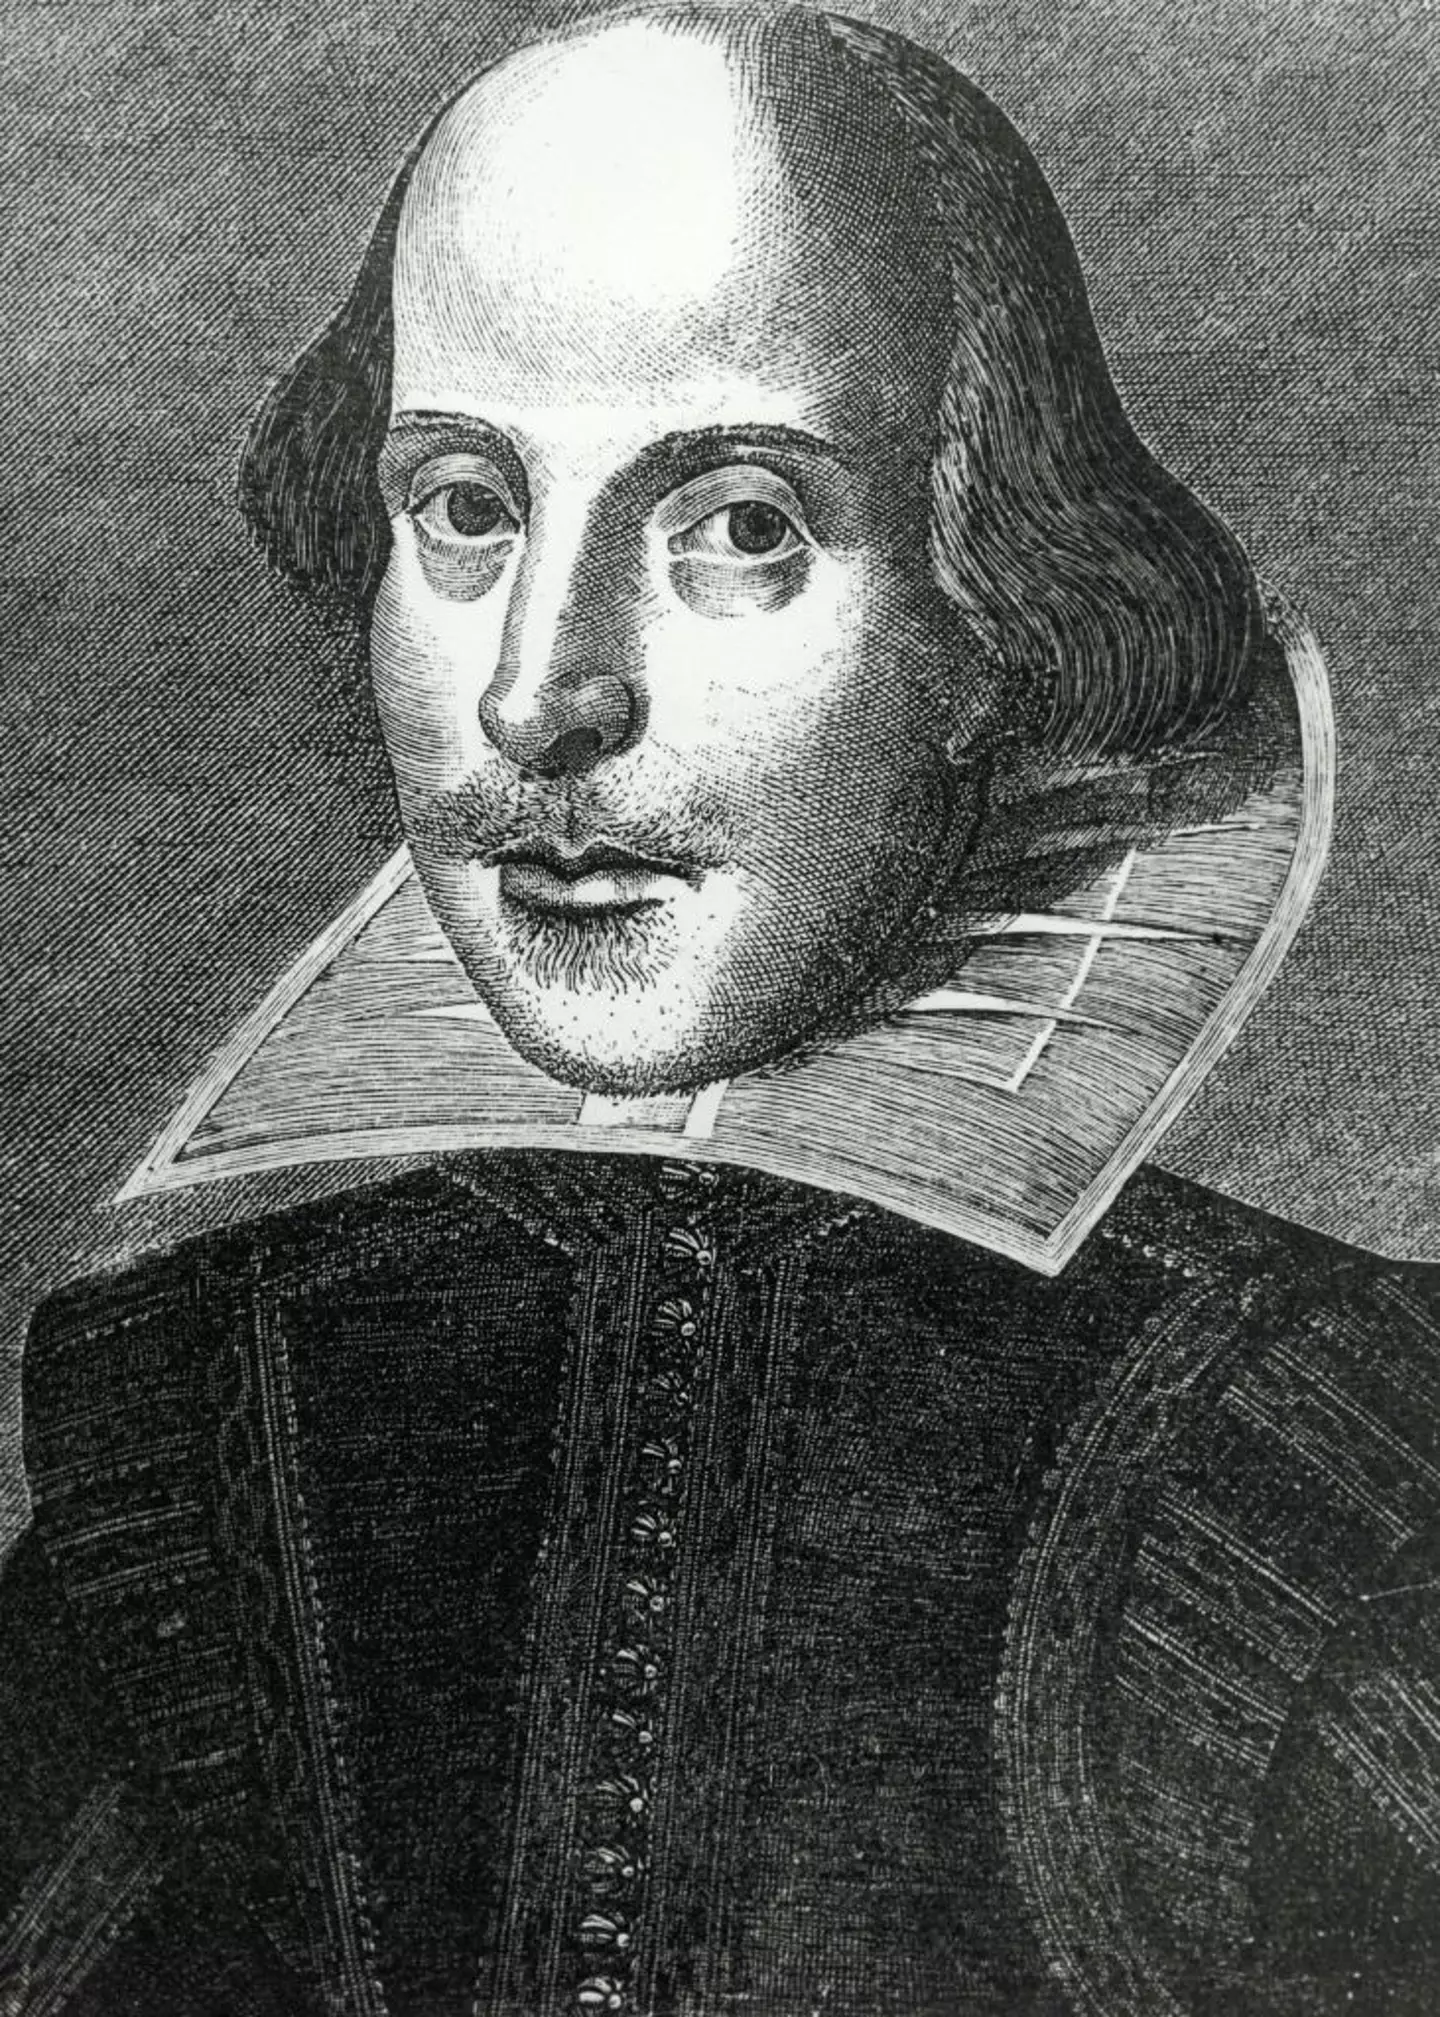 Can anyone see the resemblance between Adam Shulman and William Shakespeare?